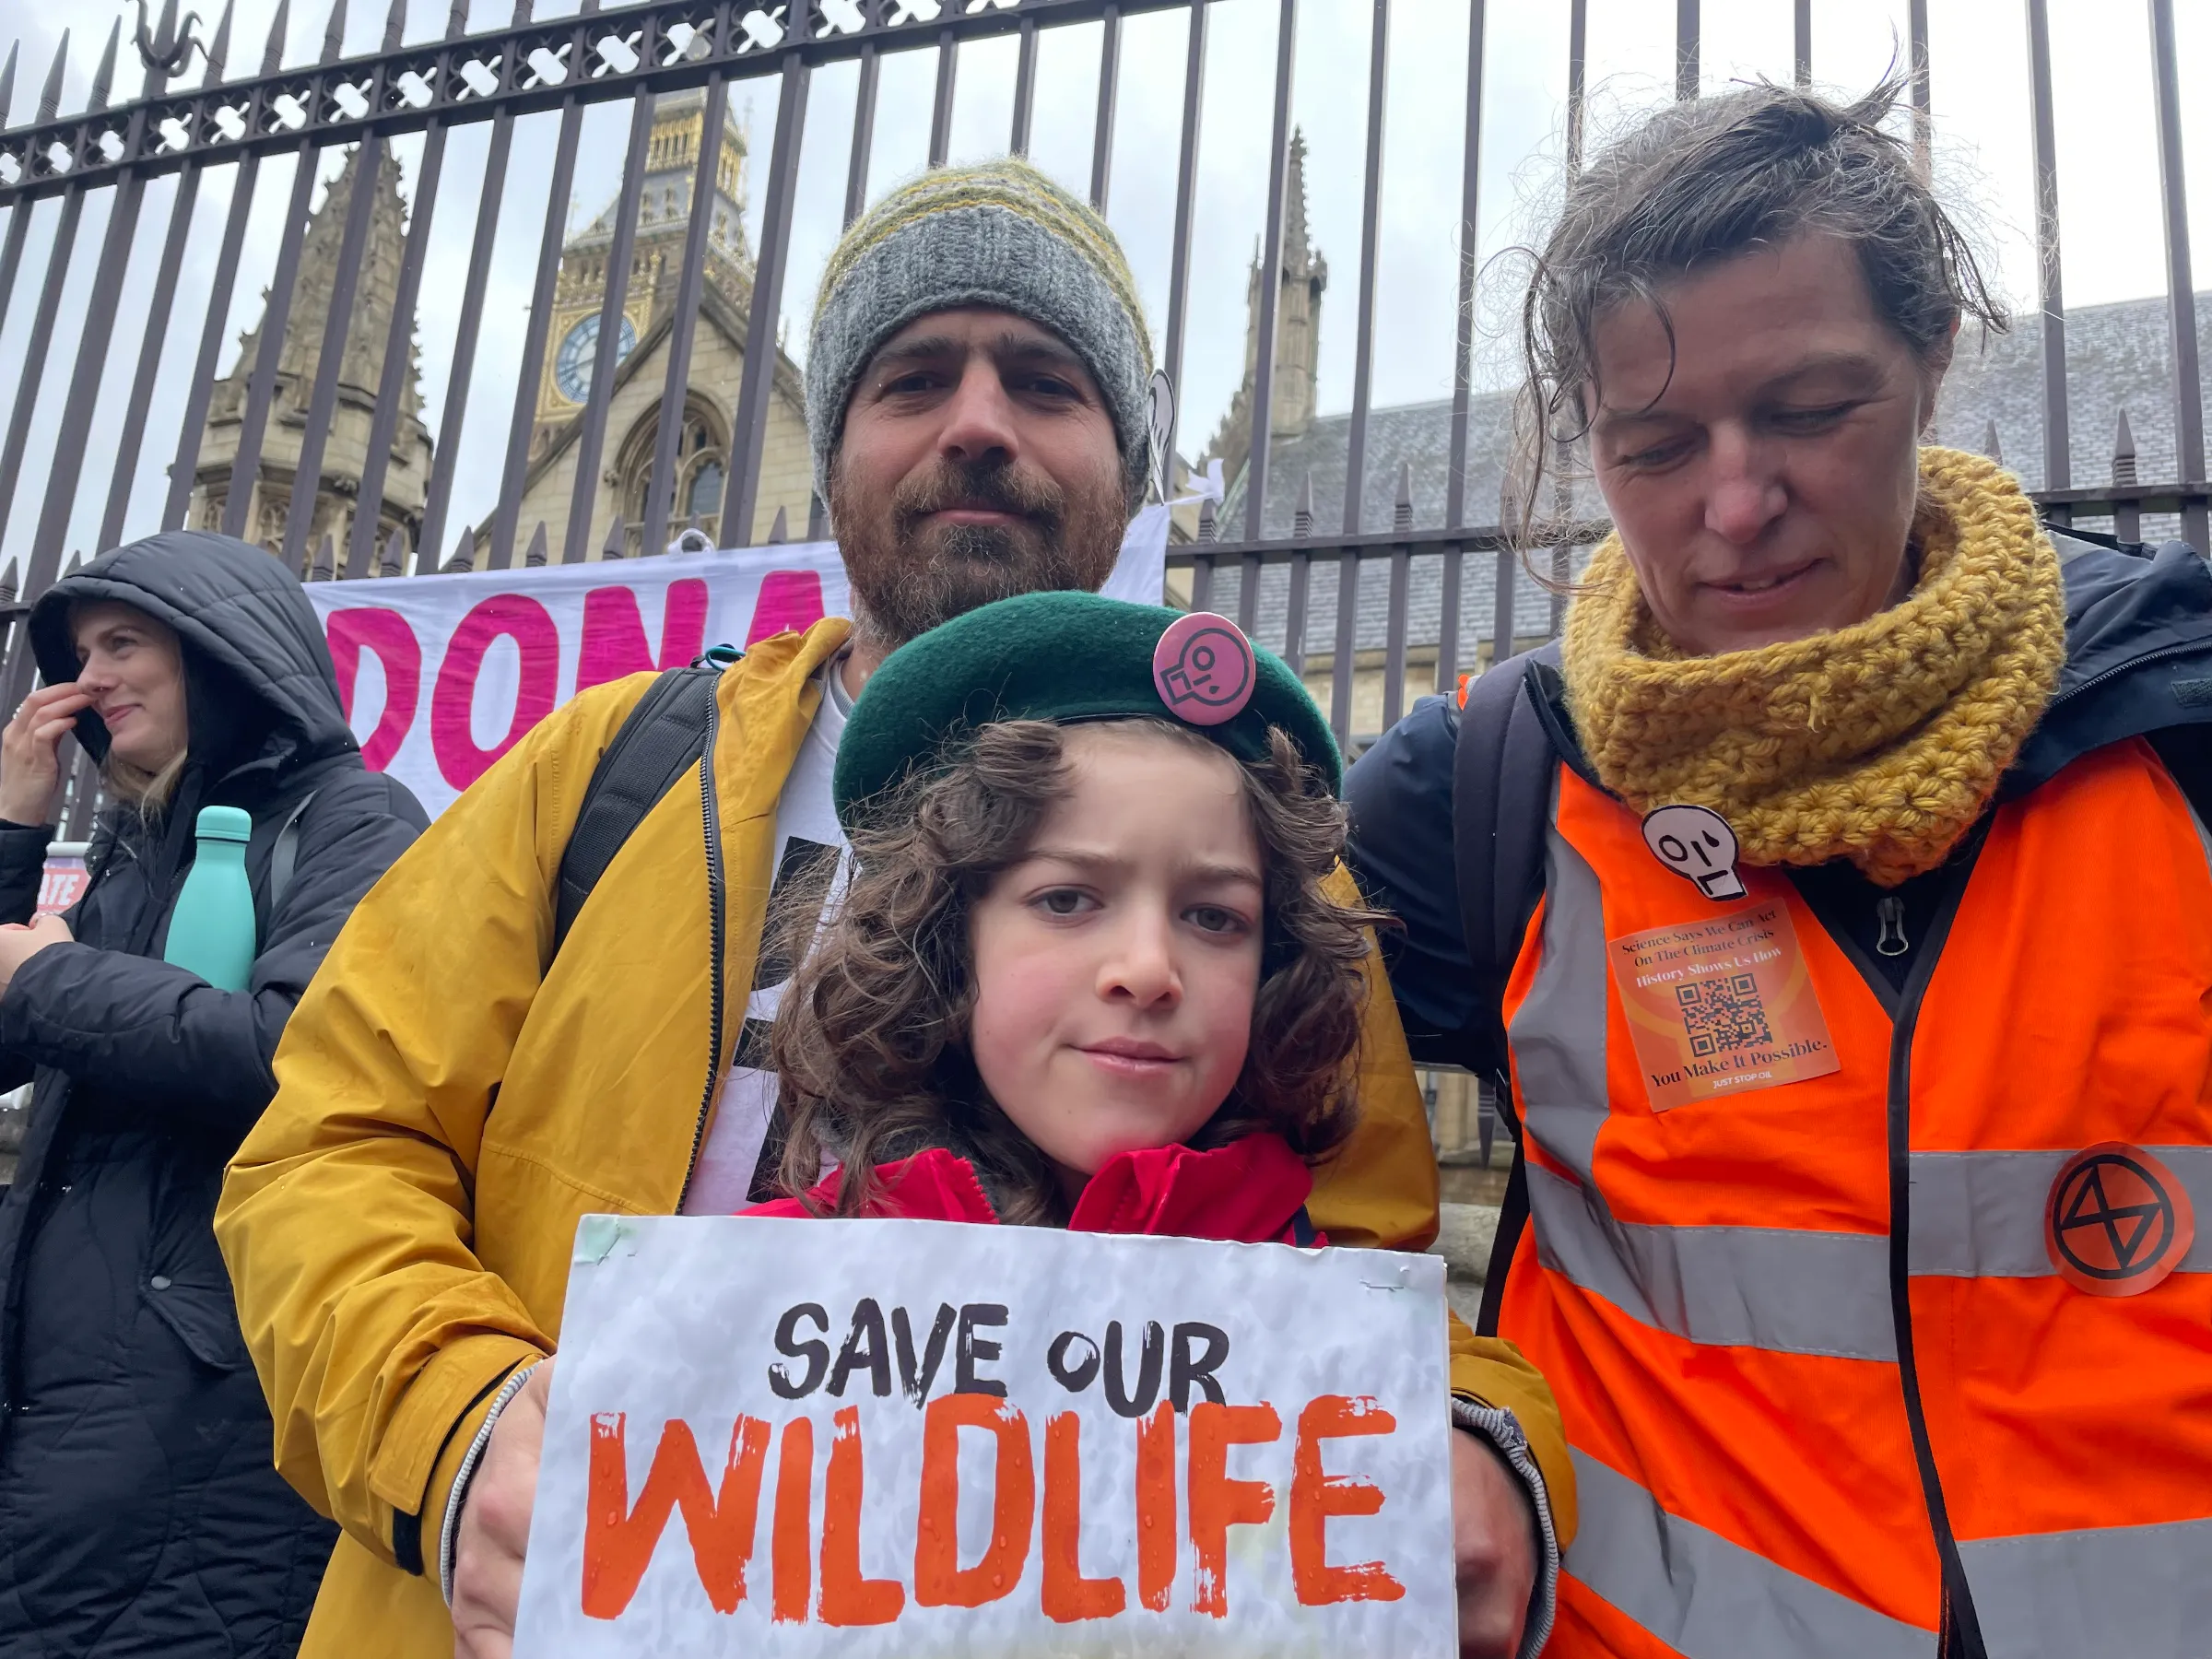 Family members Dan Mifsud, Ezra Mifsud and Sophy Allen join “The Big One”, a protest organised by Extinction Rebellion outside Parliament in London on April 21, 2023. Thomson Reuters Foundation/Laurie Goering